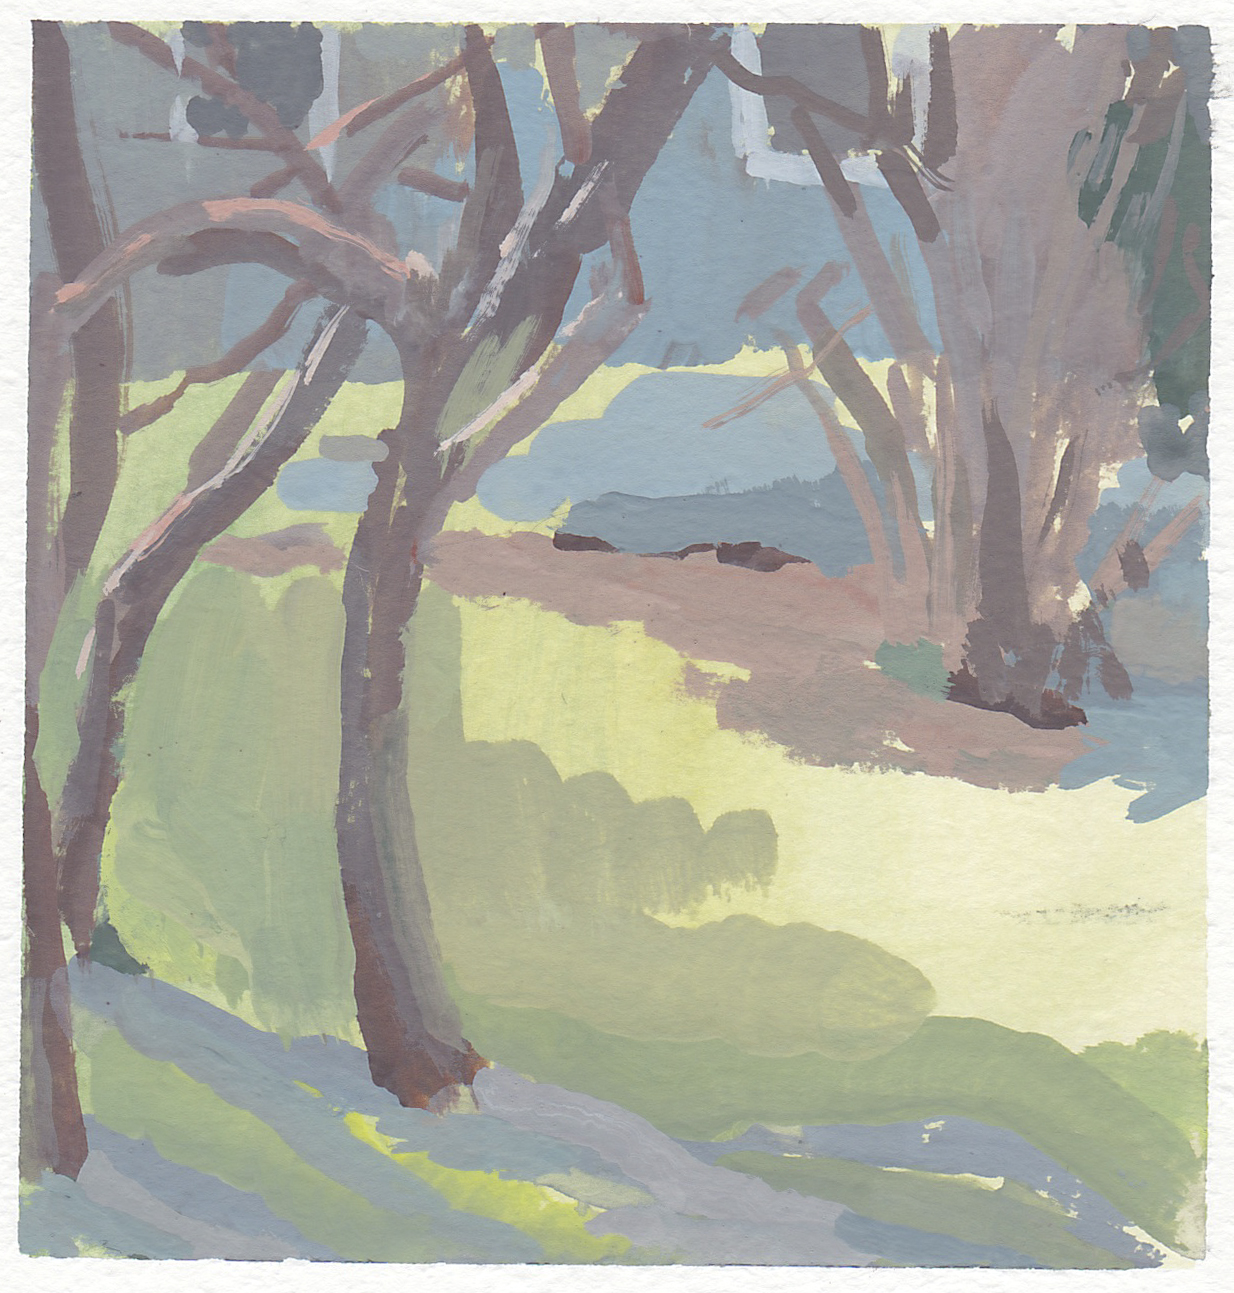    plum tree in february     gouache on paper 4x4" 2018  private collection in Nashville, TN   